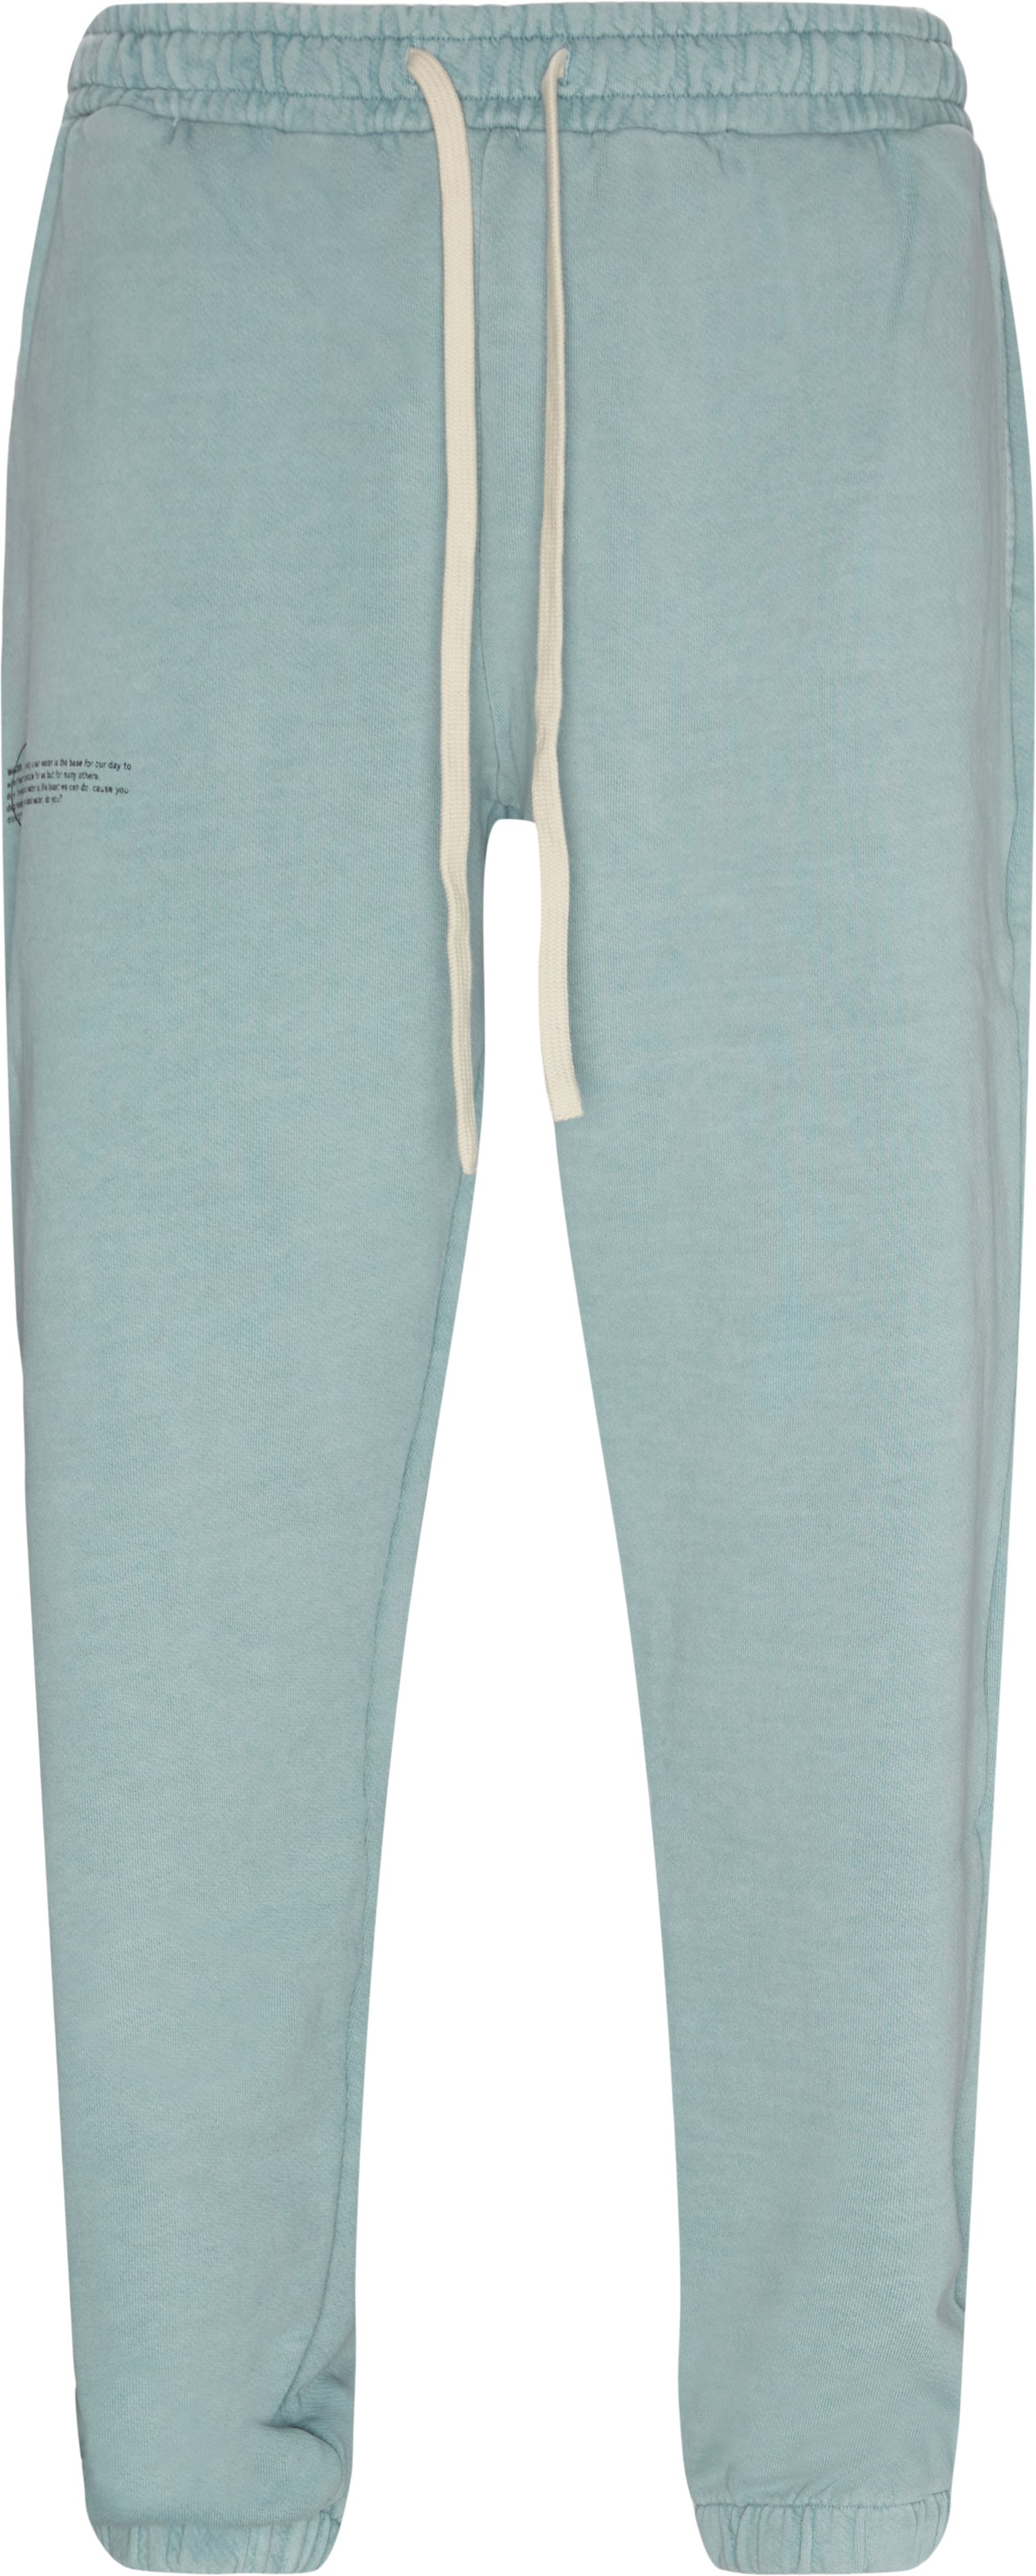 Project Earth sweatpants - Trousers - Regular fit - Turquoise